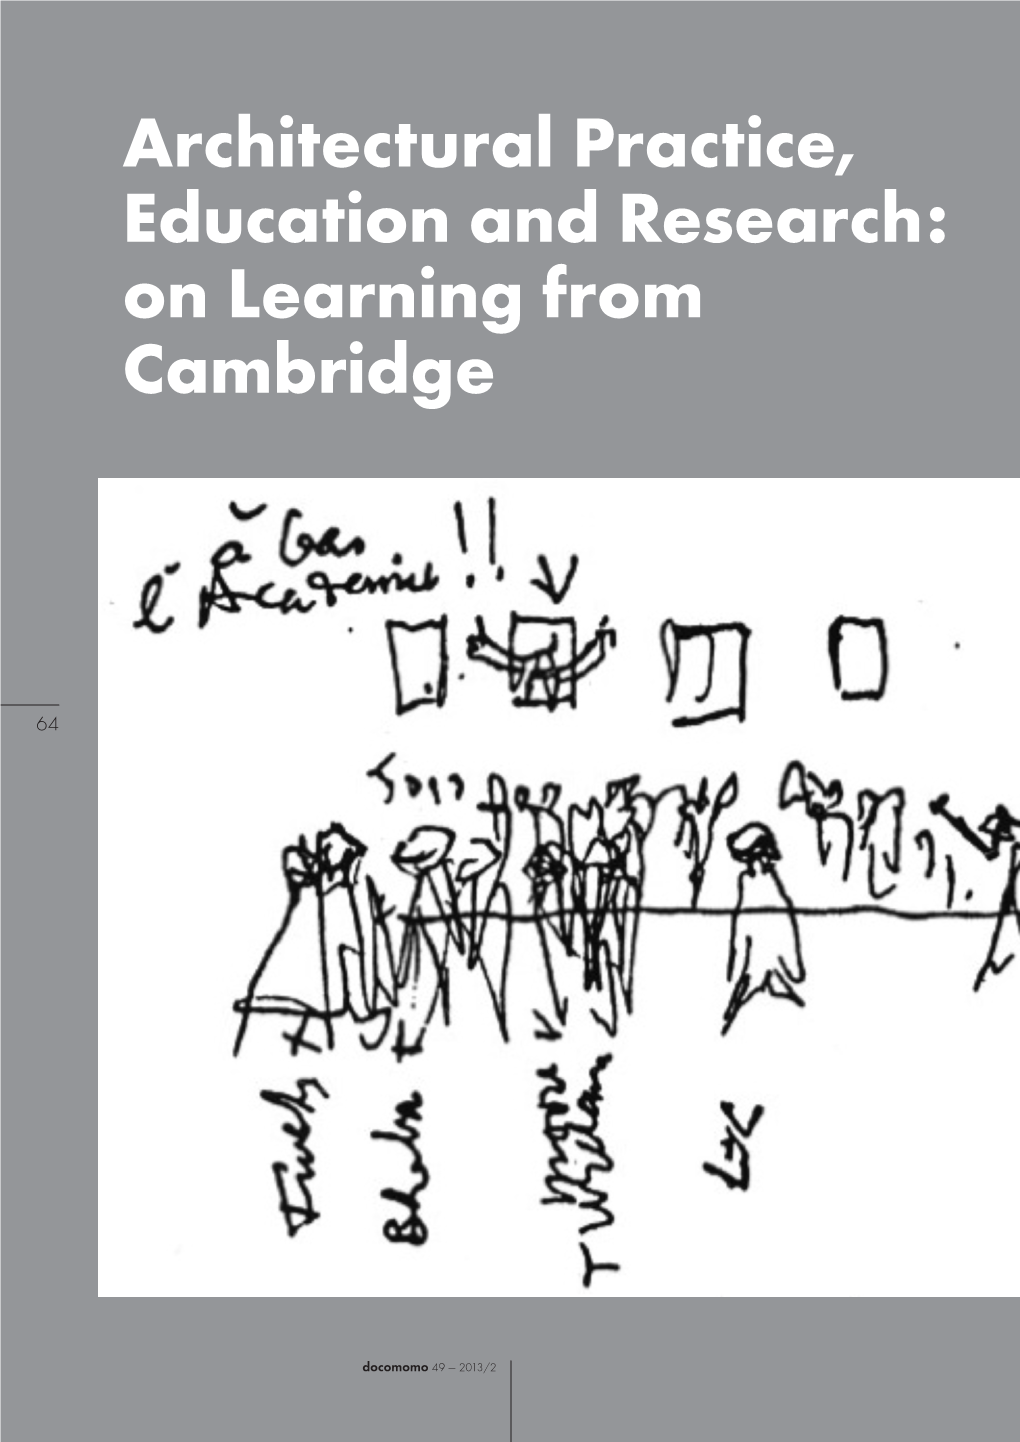 Architectural Practice, Education and Research: on Learning from Cambridge